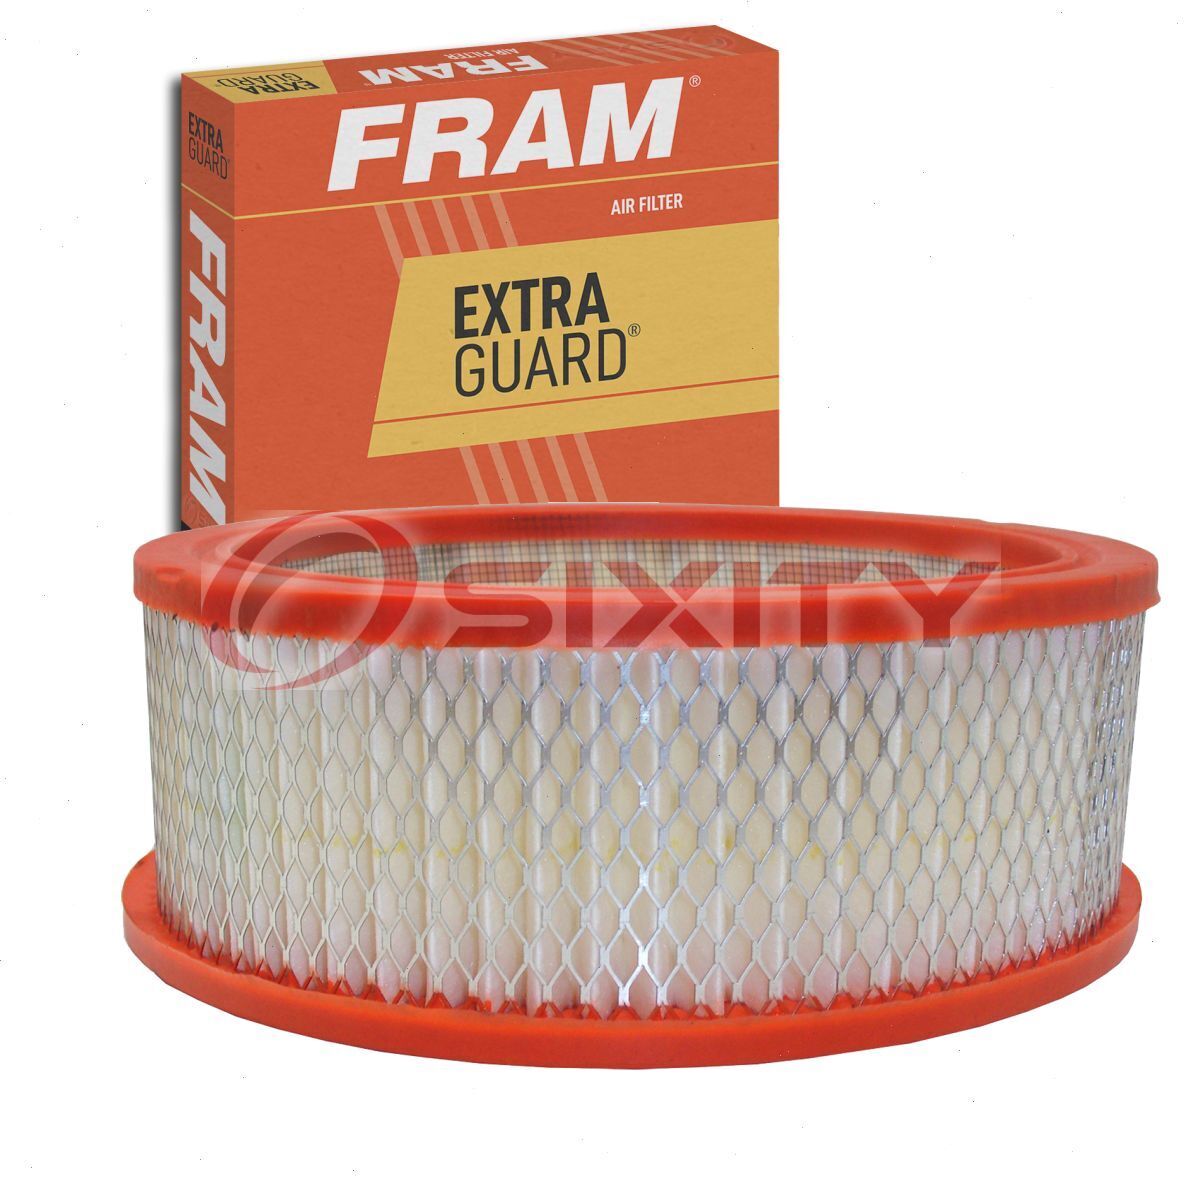 FRAM Extra Guard Air Filter for 1957-1978 Plymouth Fury Intake Inlet qk